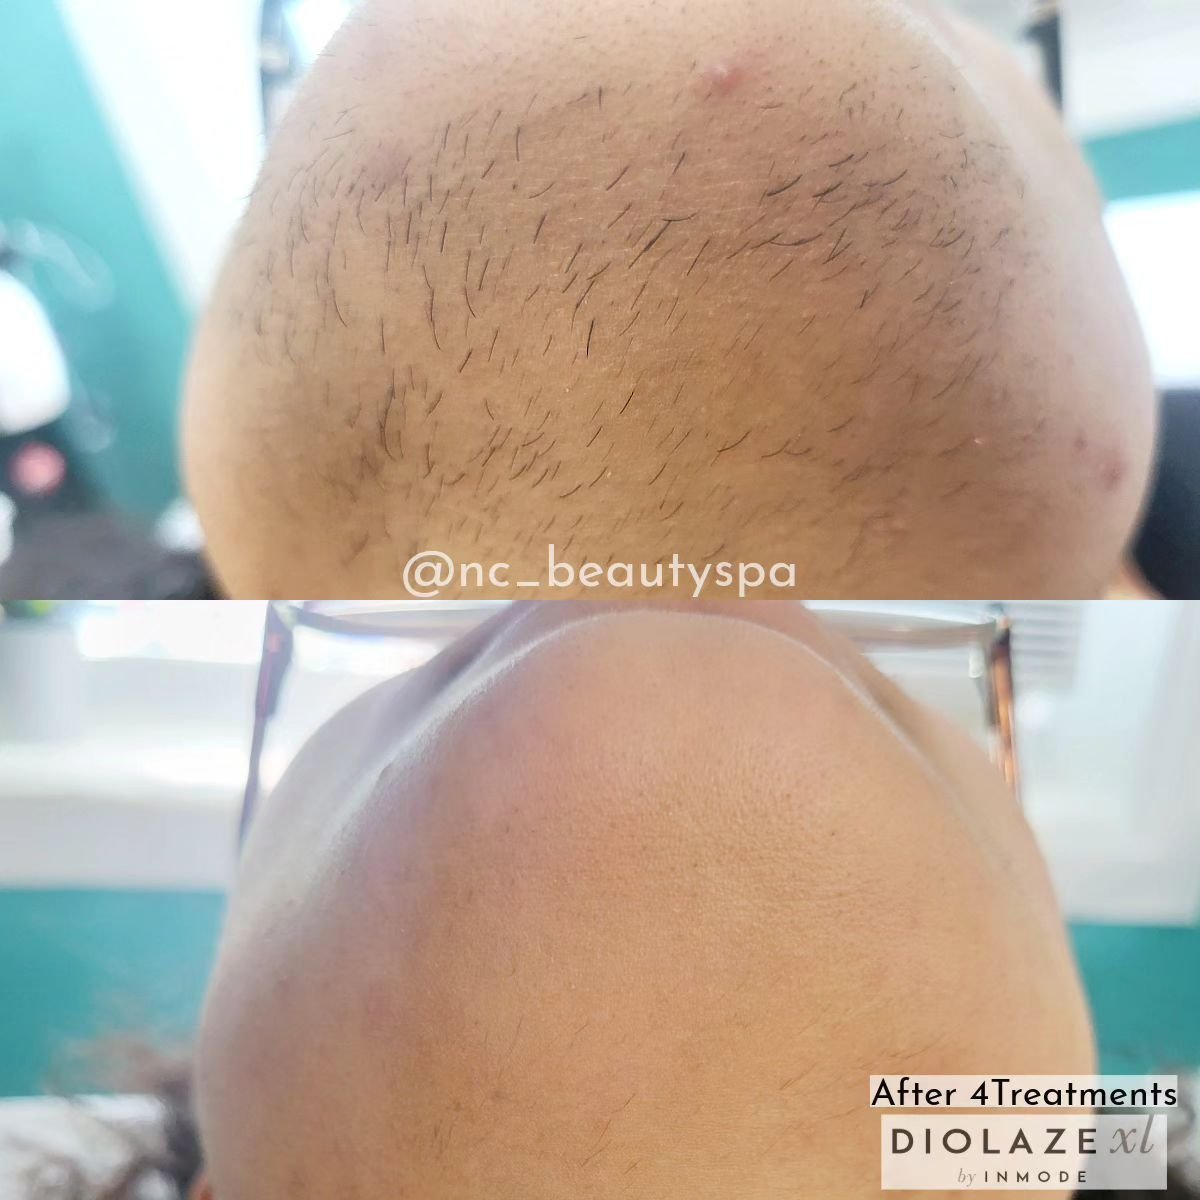 😍One Happy Client

Want to get rid our your unwanted hair? 
Talk to us about DiolazeXL Laser  Hair Removal 

📲Call/Text us at 416-562-8303 
📍3068B Hurontario St Mississauga ON 

#DiolazeXLByInmode #lasertreatment #DiolazeXL #unwantedHair #laserhai